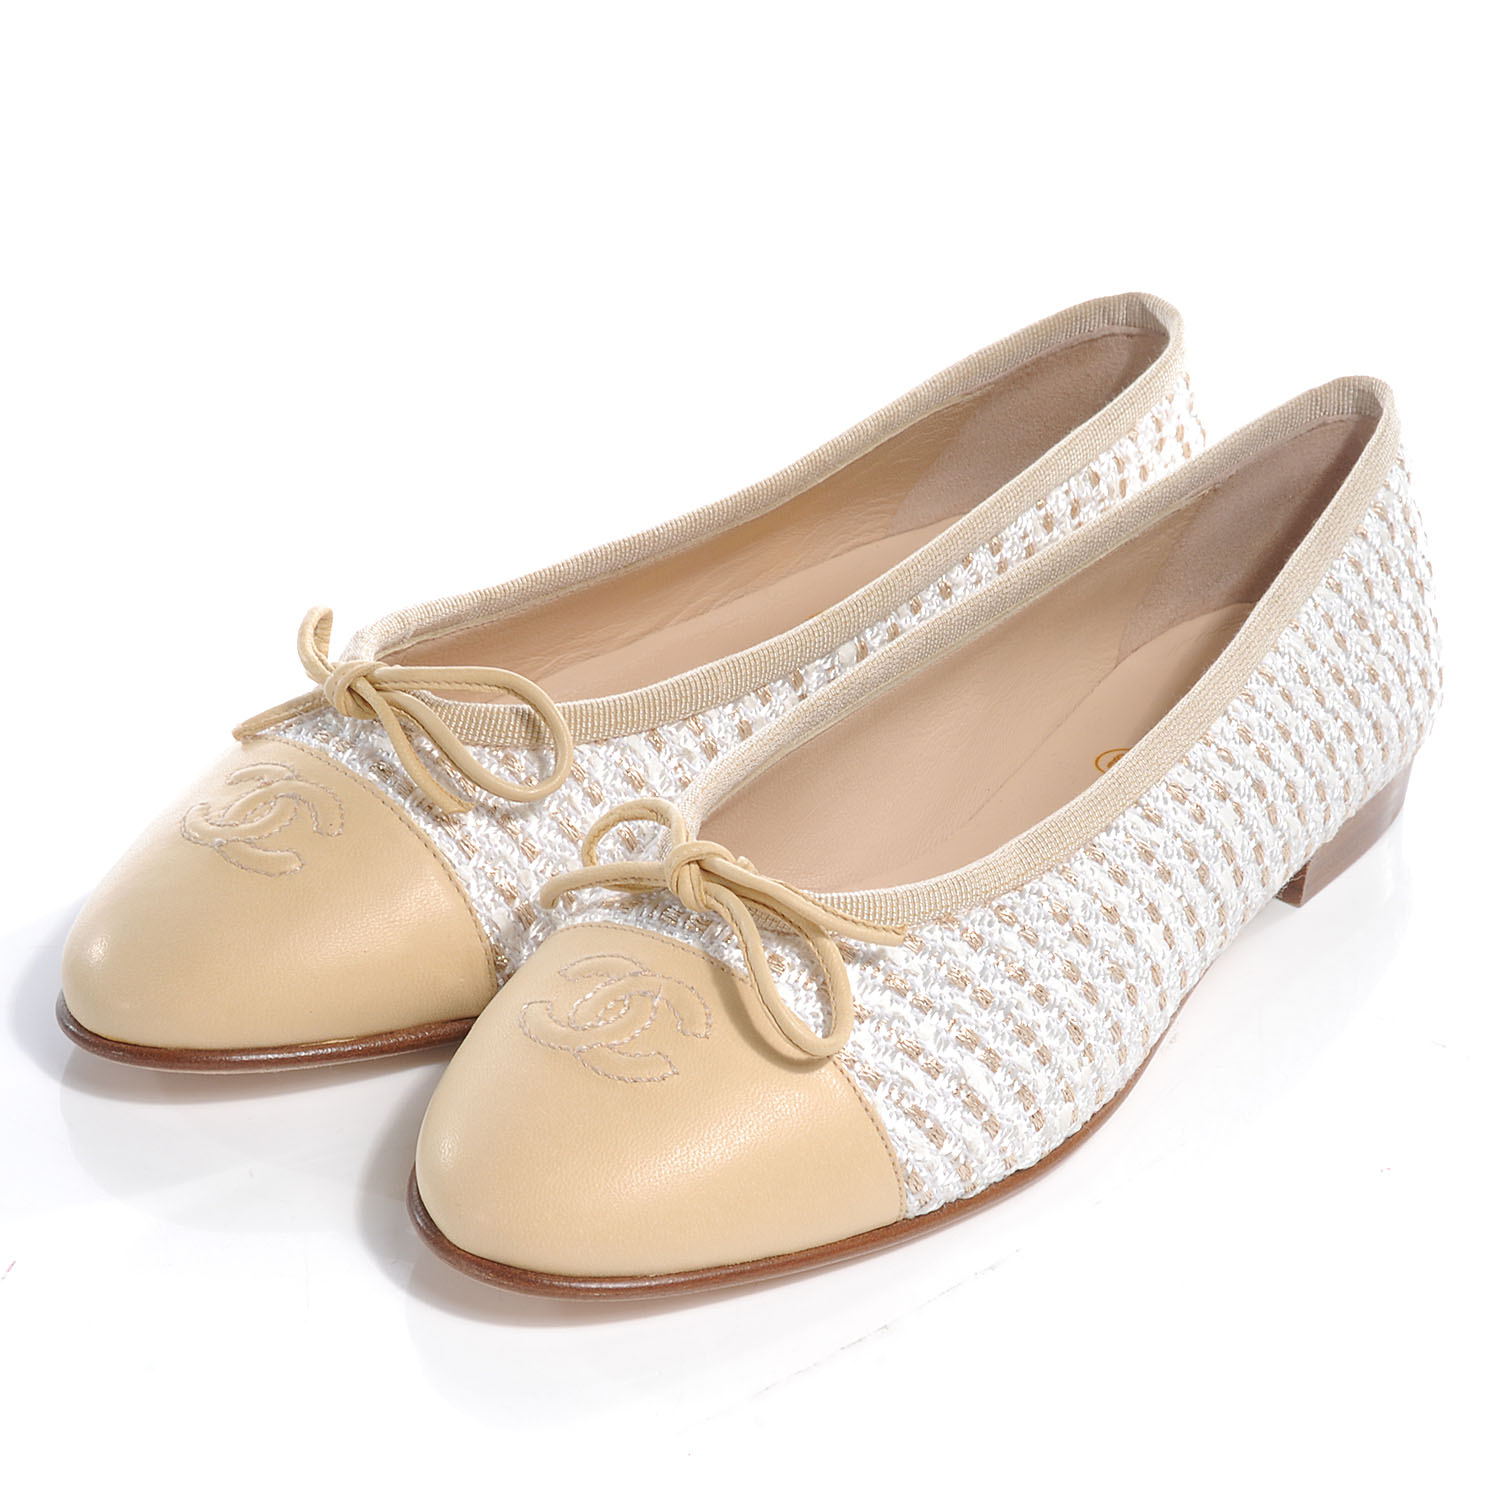 CHANEL Tweed Ballet Flats 37.5 White 61133